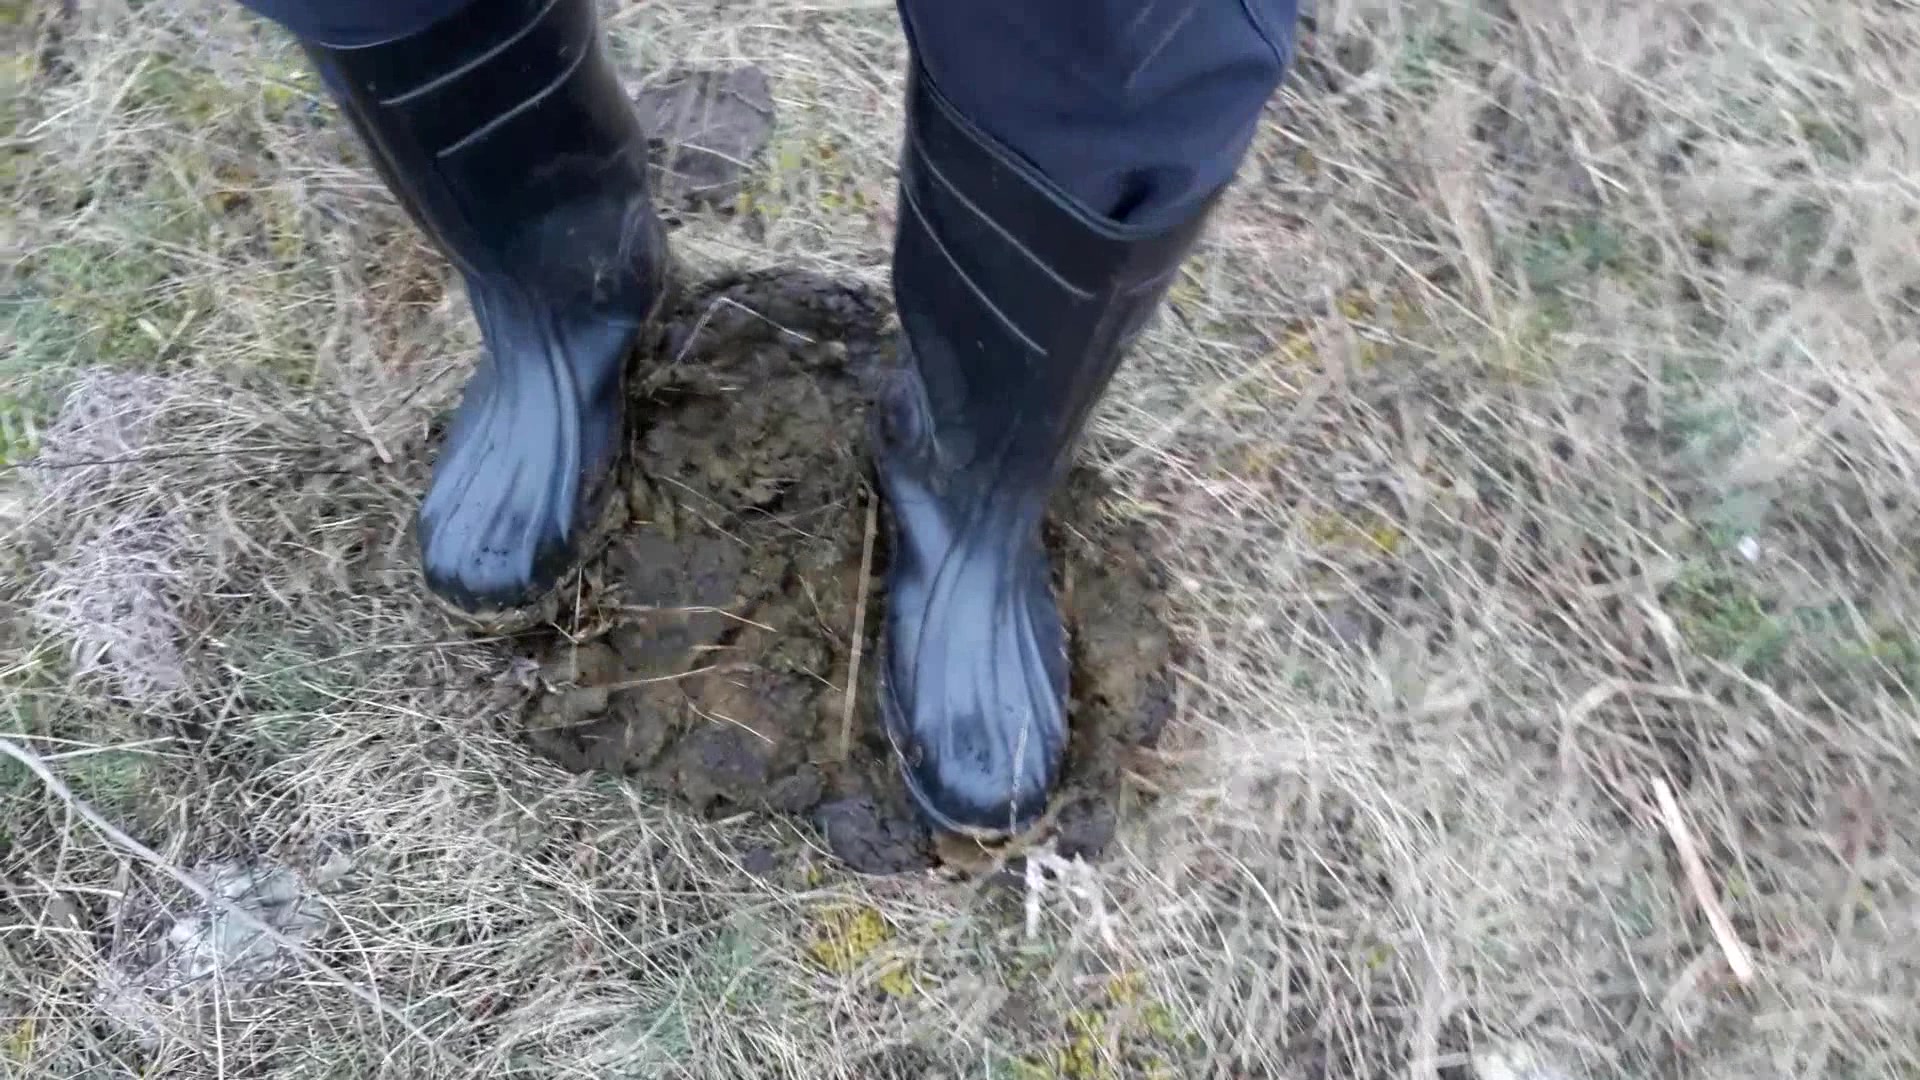 Rubber boots vs cowshit - video 20